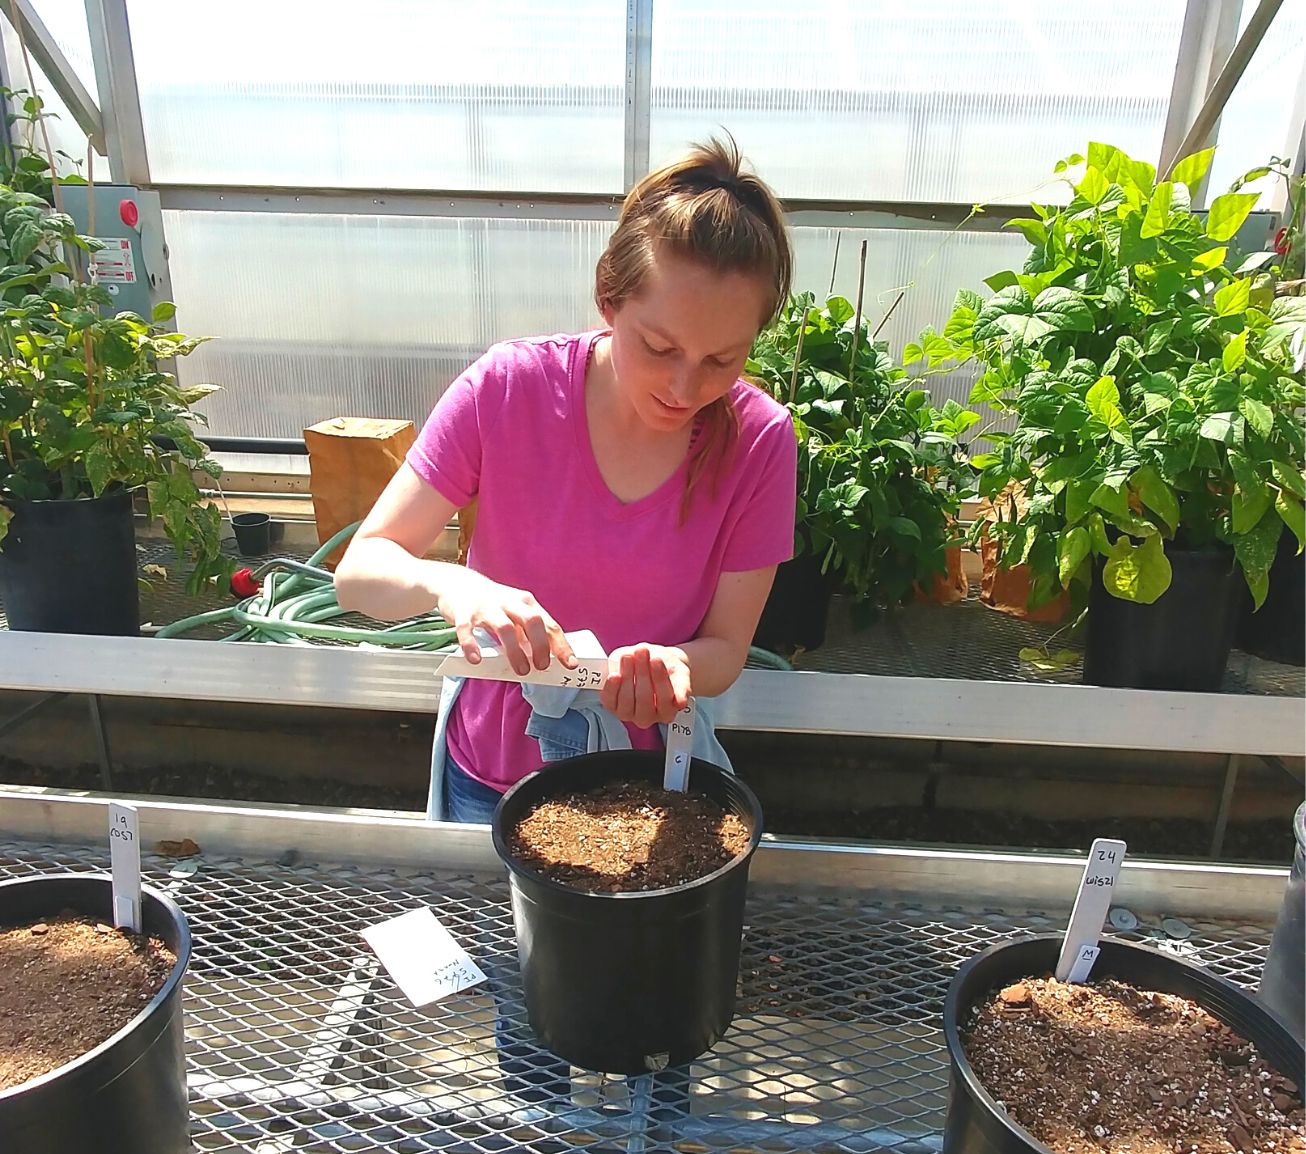 Student in greenhouse